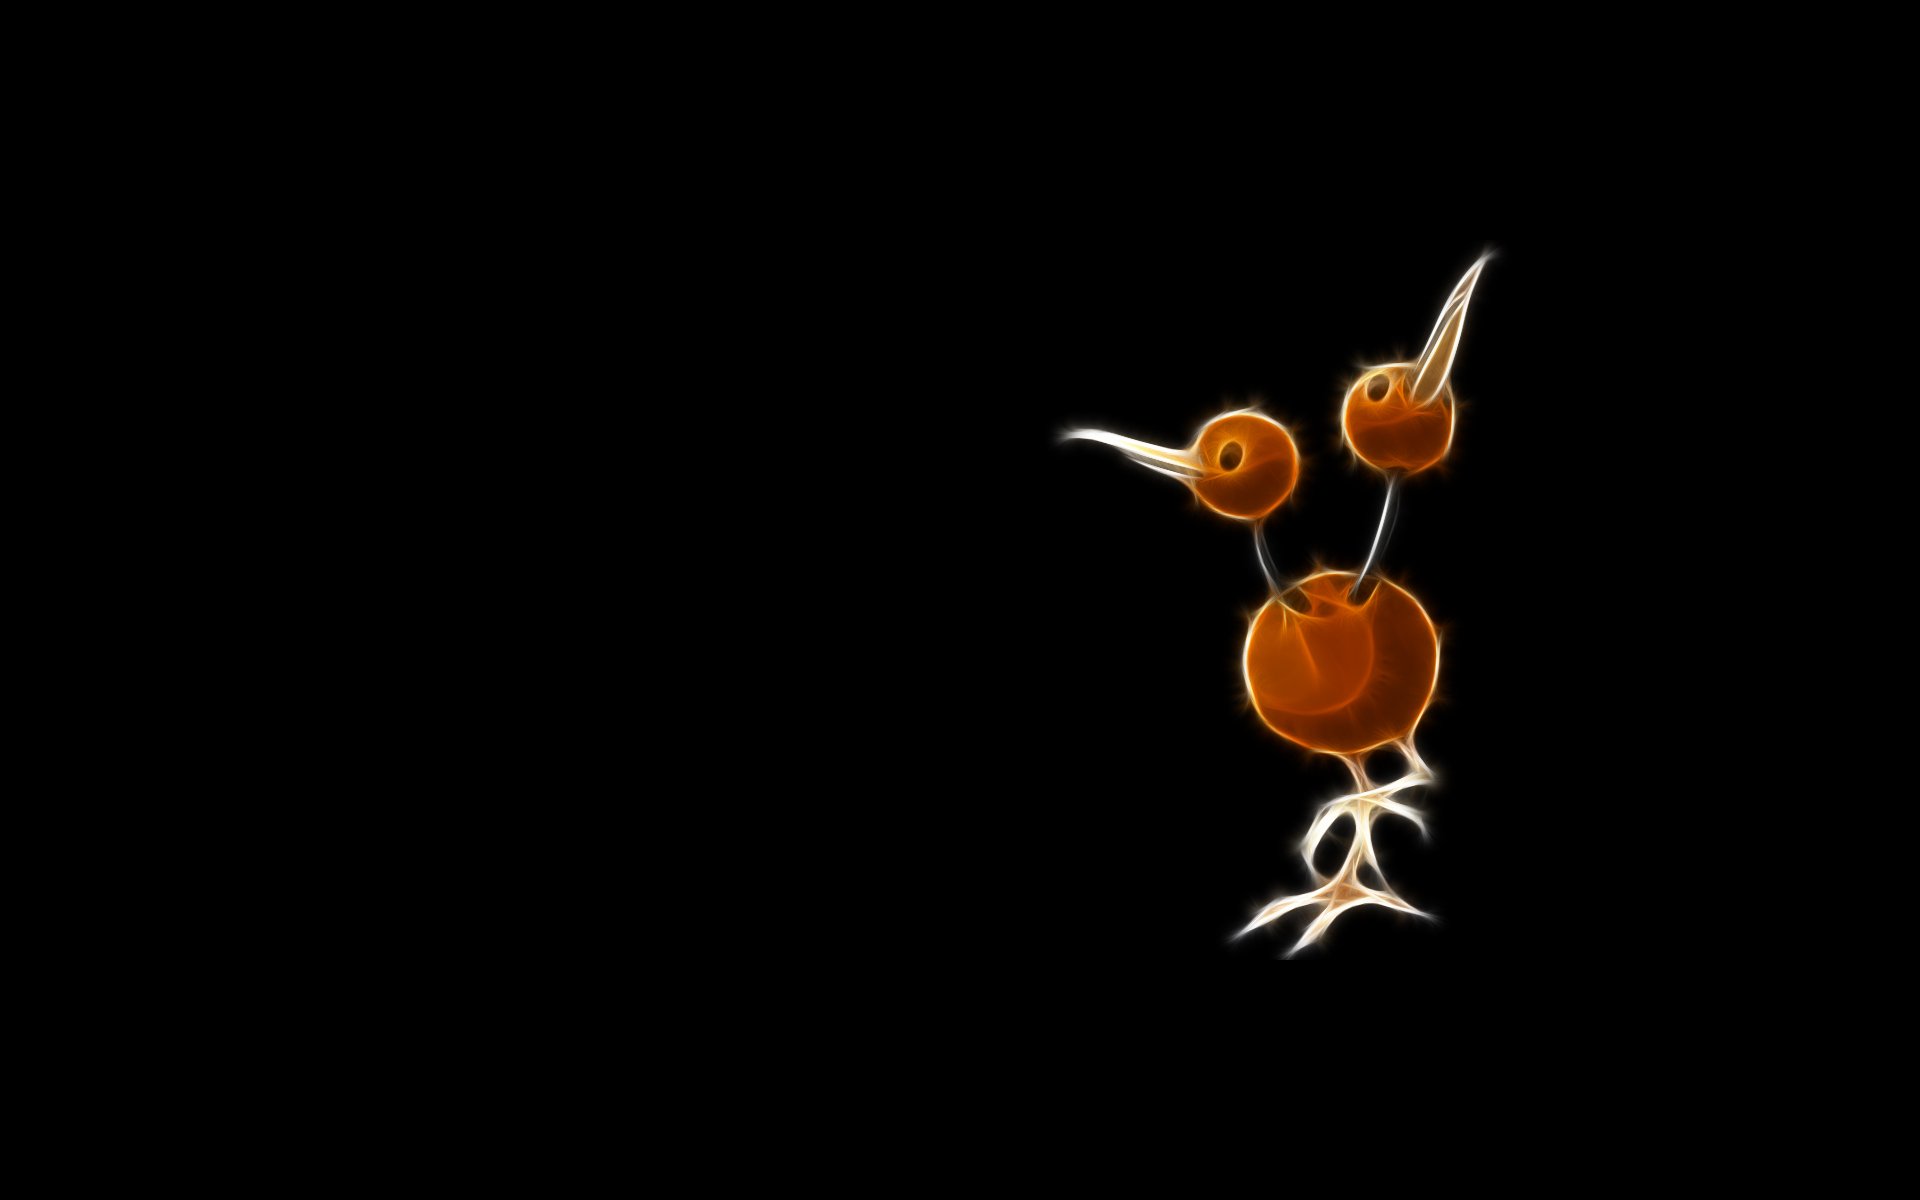 Doduo Wallpapers Doduo Myspace Backgrounds Doduo Backgrounds For